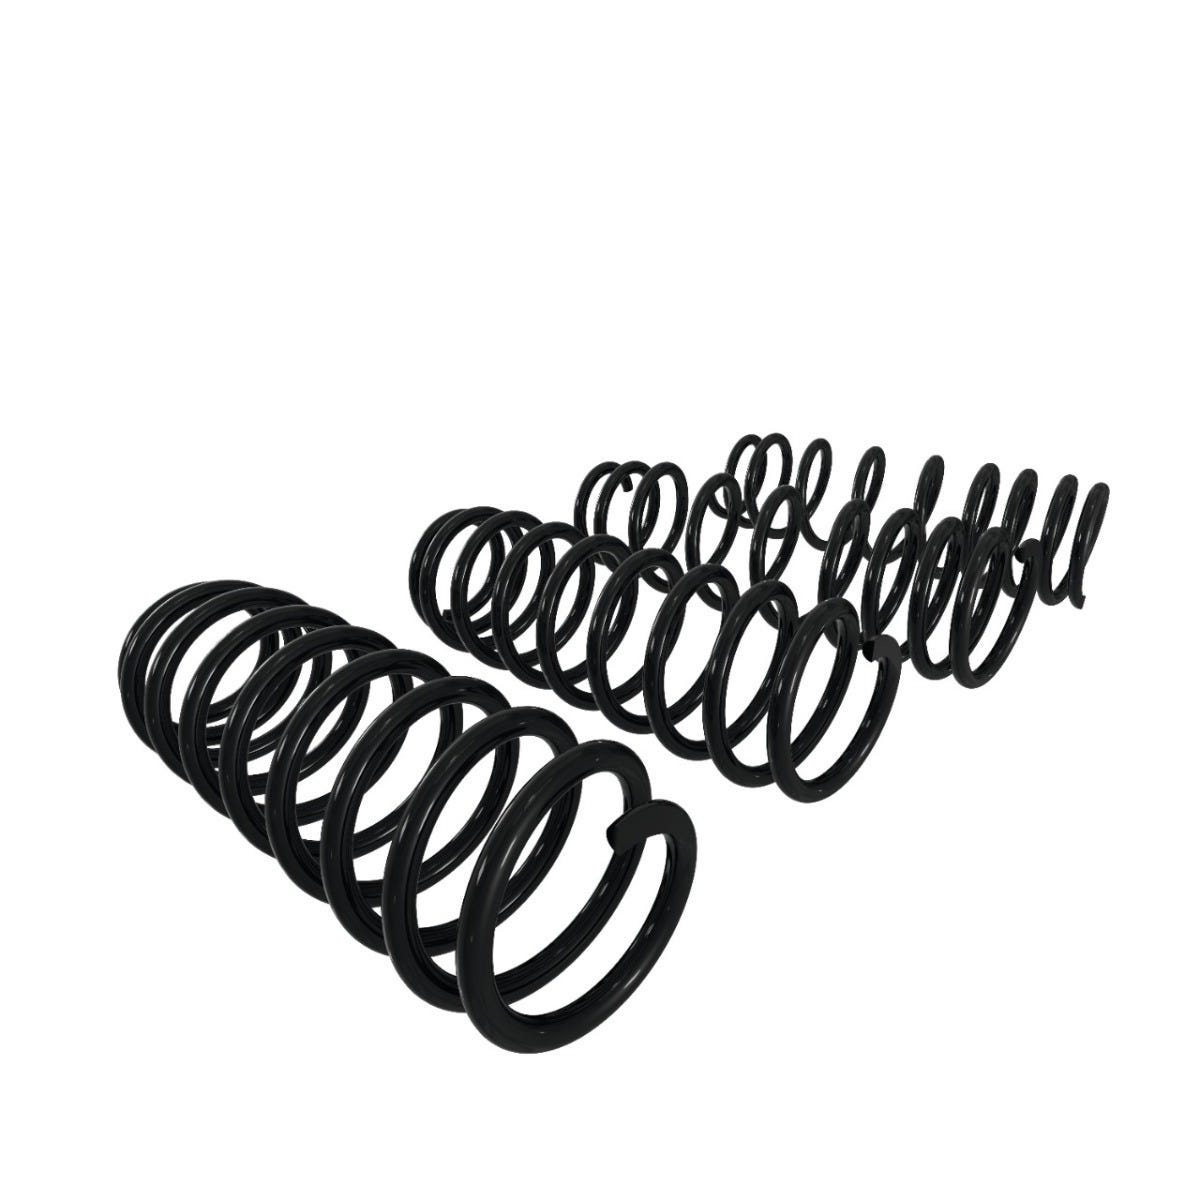 Can-am Heavy Duty Spring Kit 715005084 - The Parts Lodge